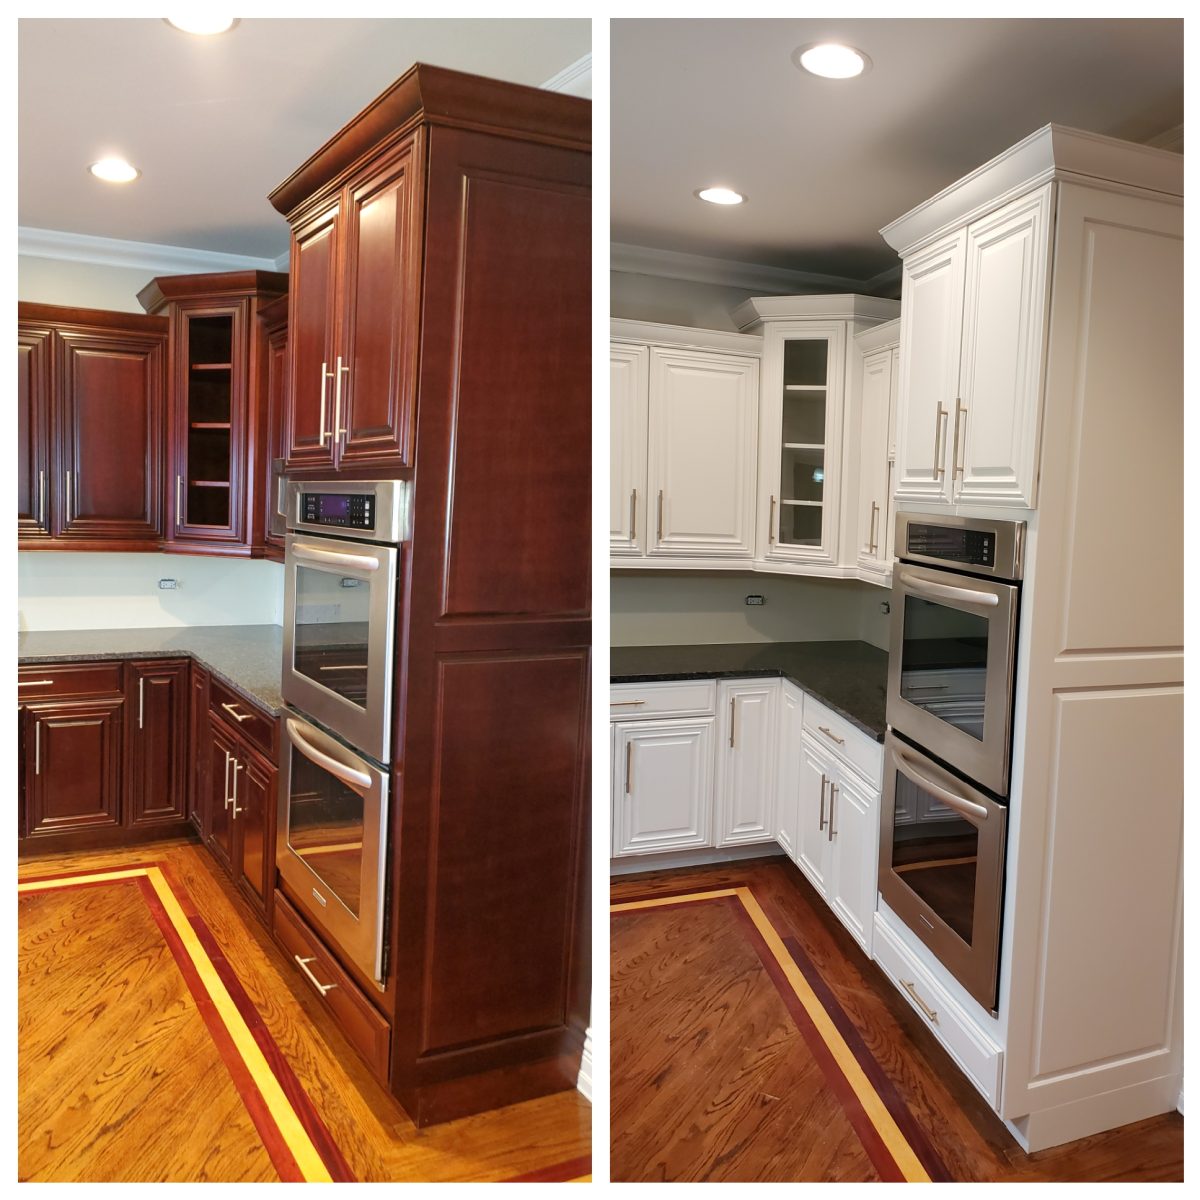 Tips For Painting Cherry Cabinets White, How To Whitewash Cherry Cabinets